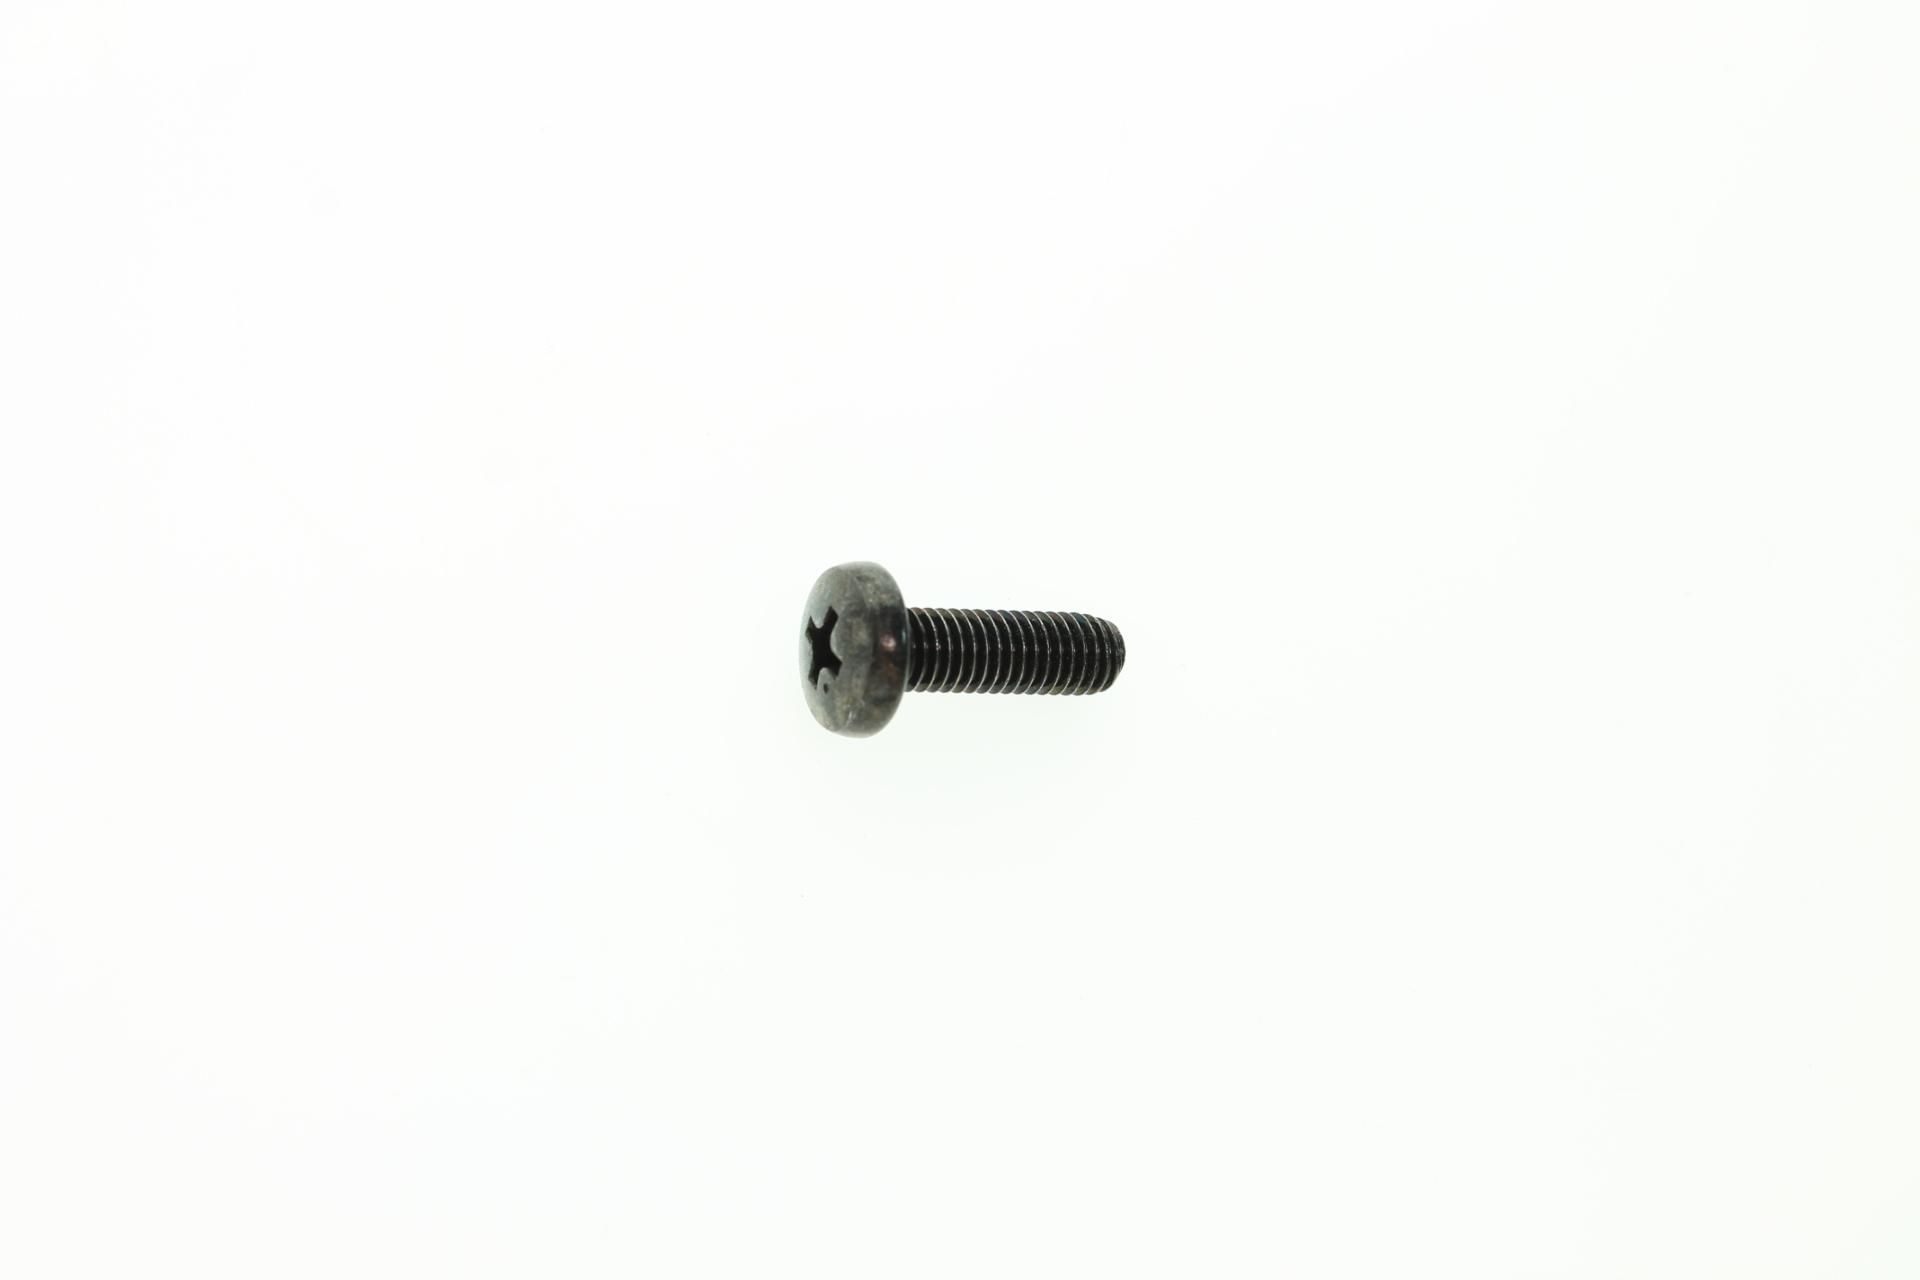 90149-05129-00 Superseded by 98907-05016-00 - BOLT,SOCKET